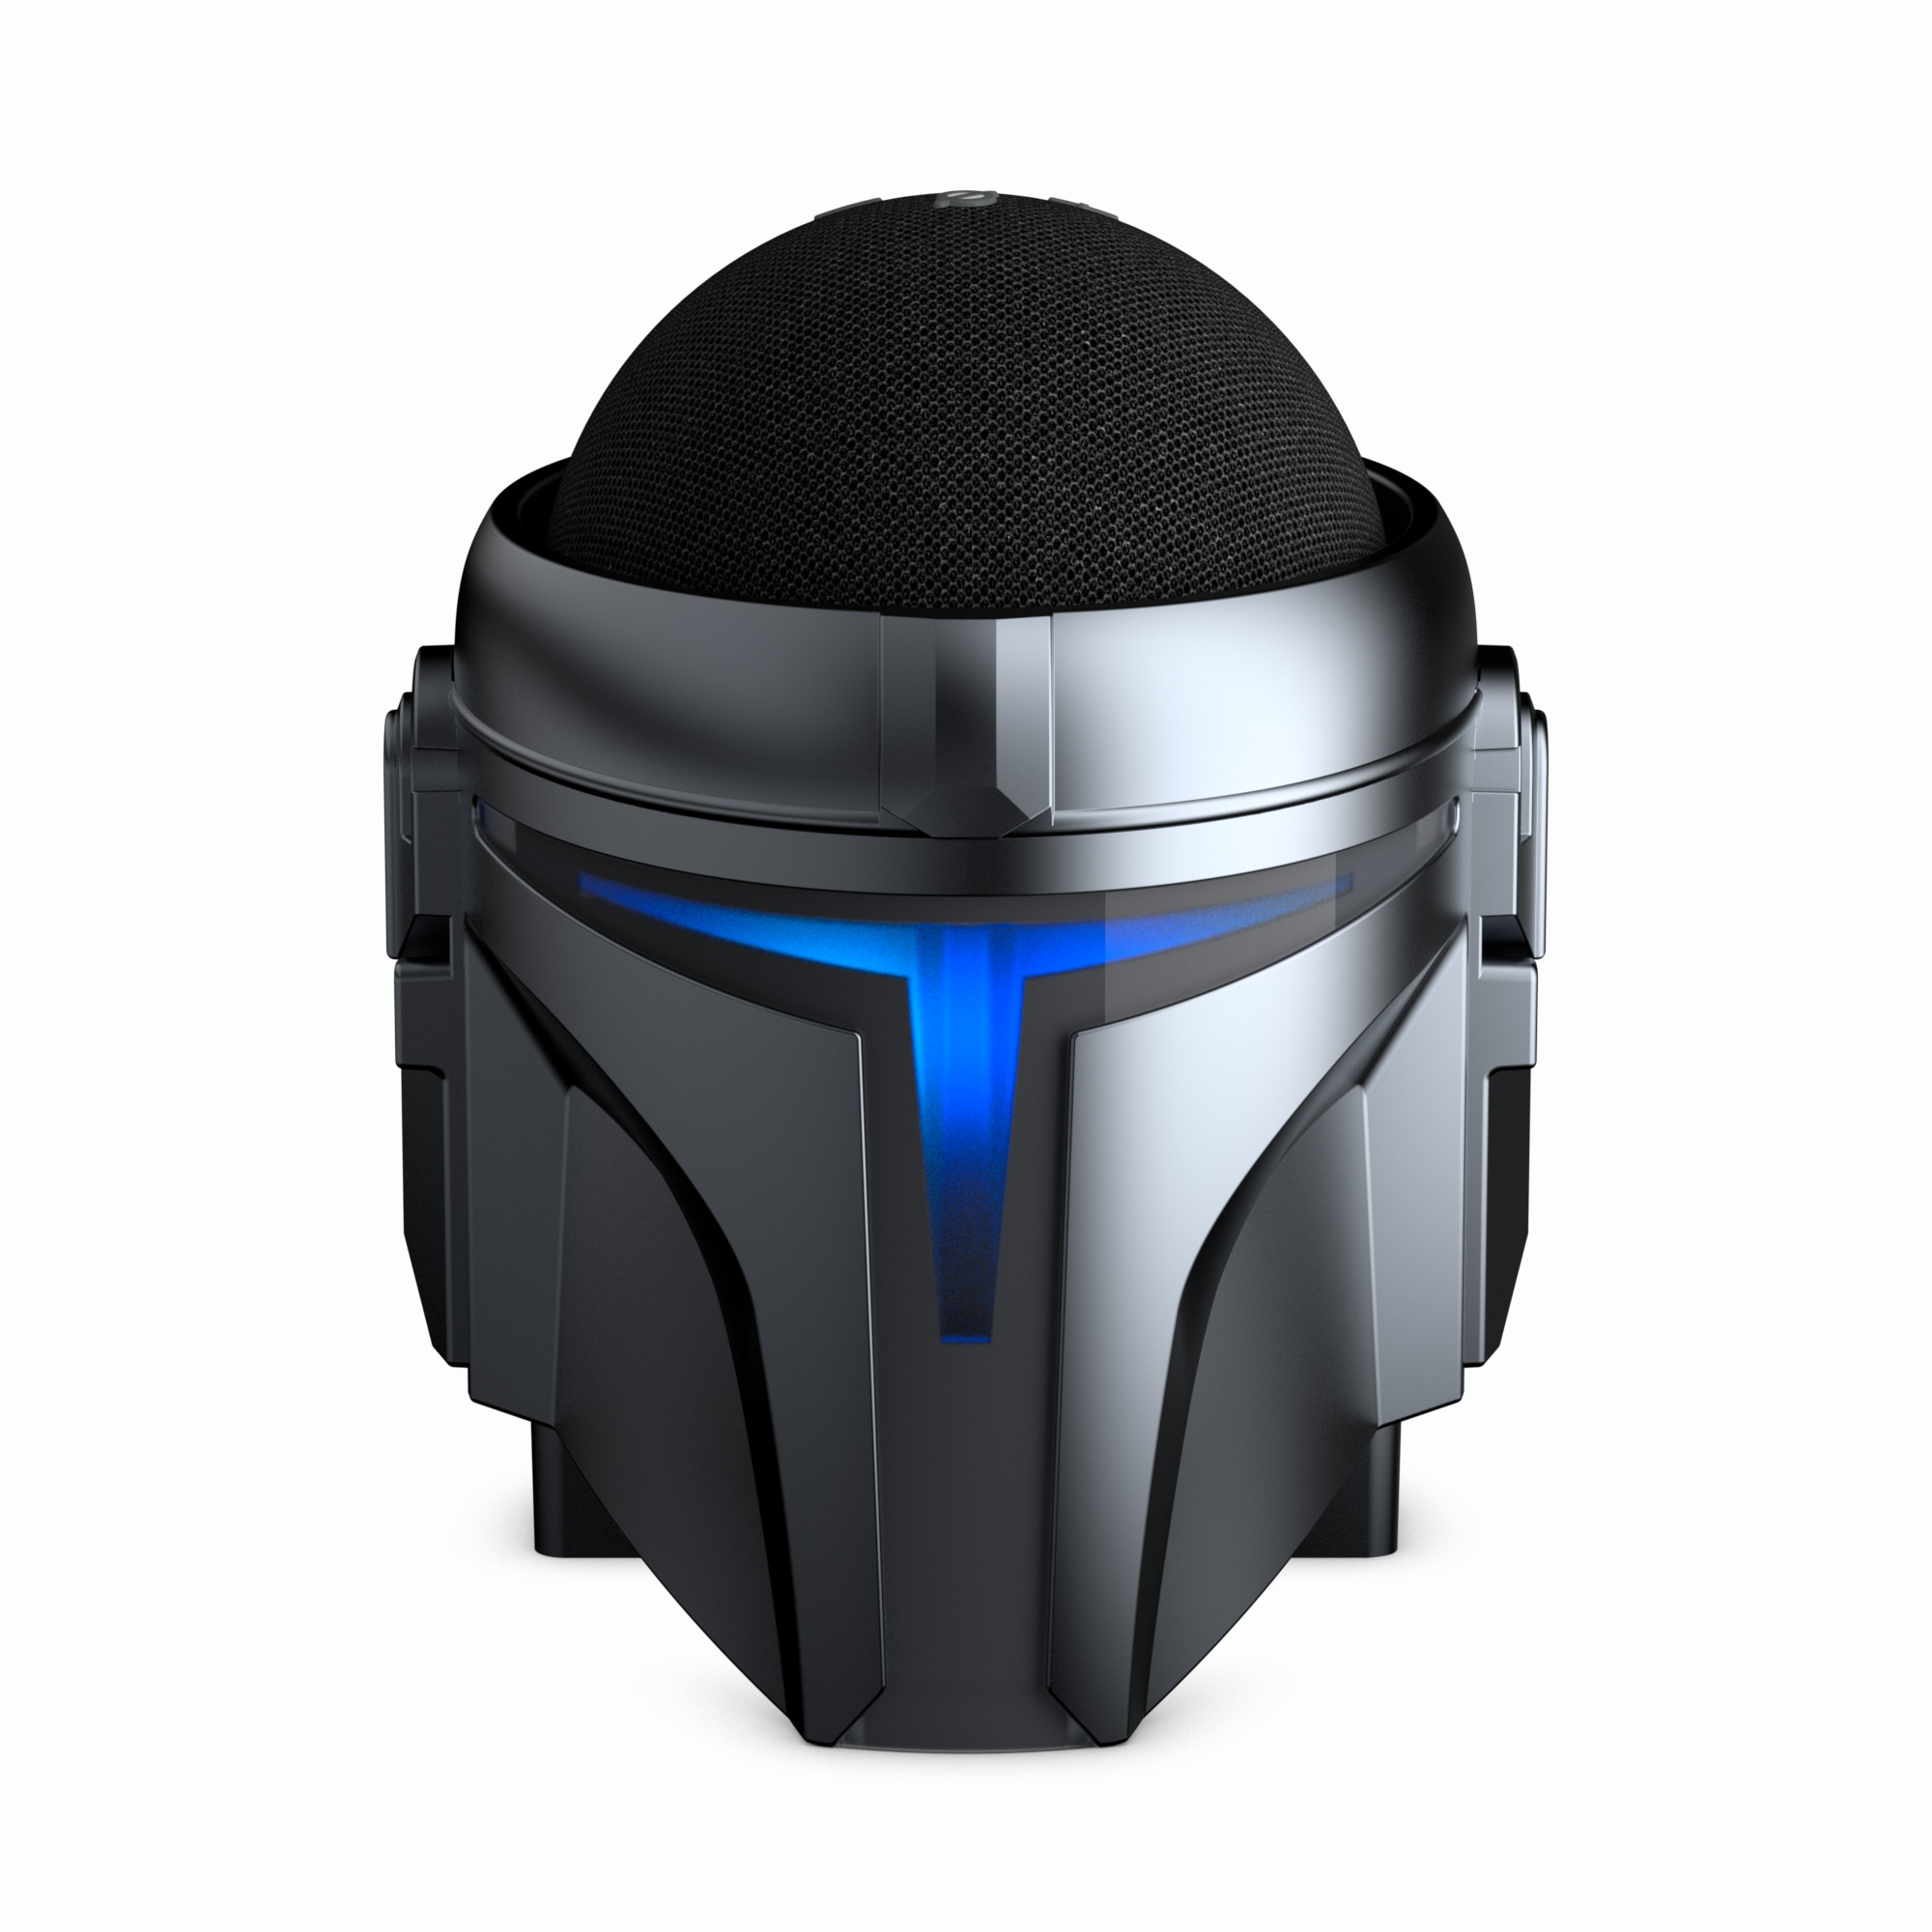 Product render of Mando Helmet with Echo Dot. Lighting, compositing, and material creation were made in Cinema4D